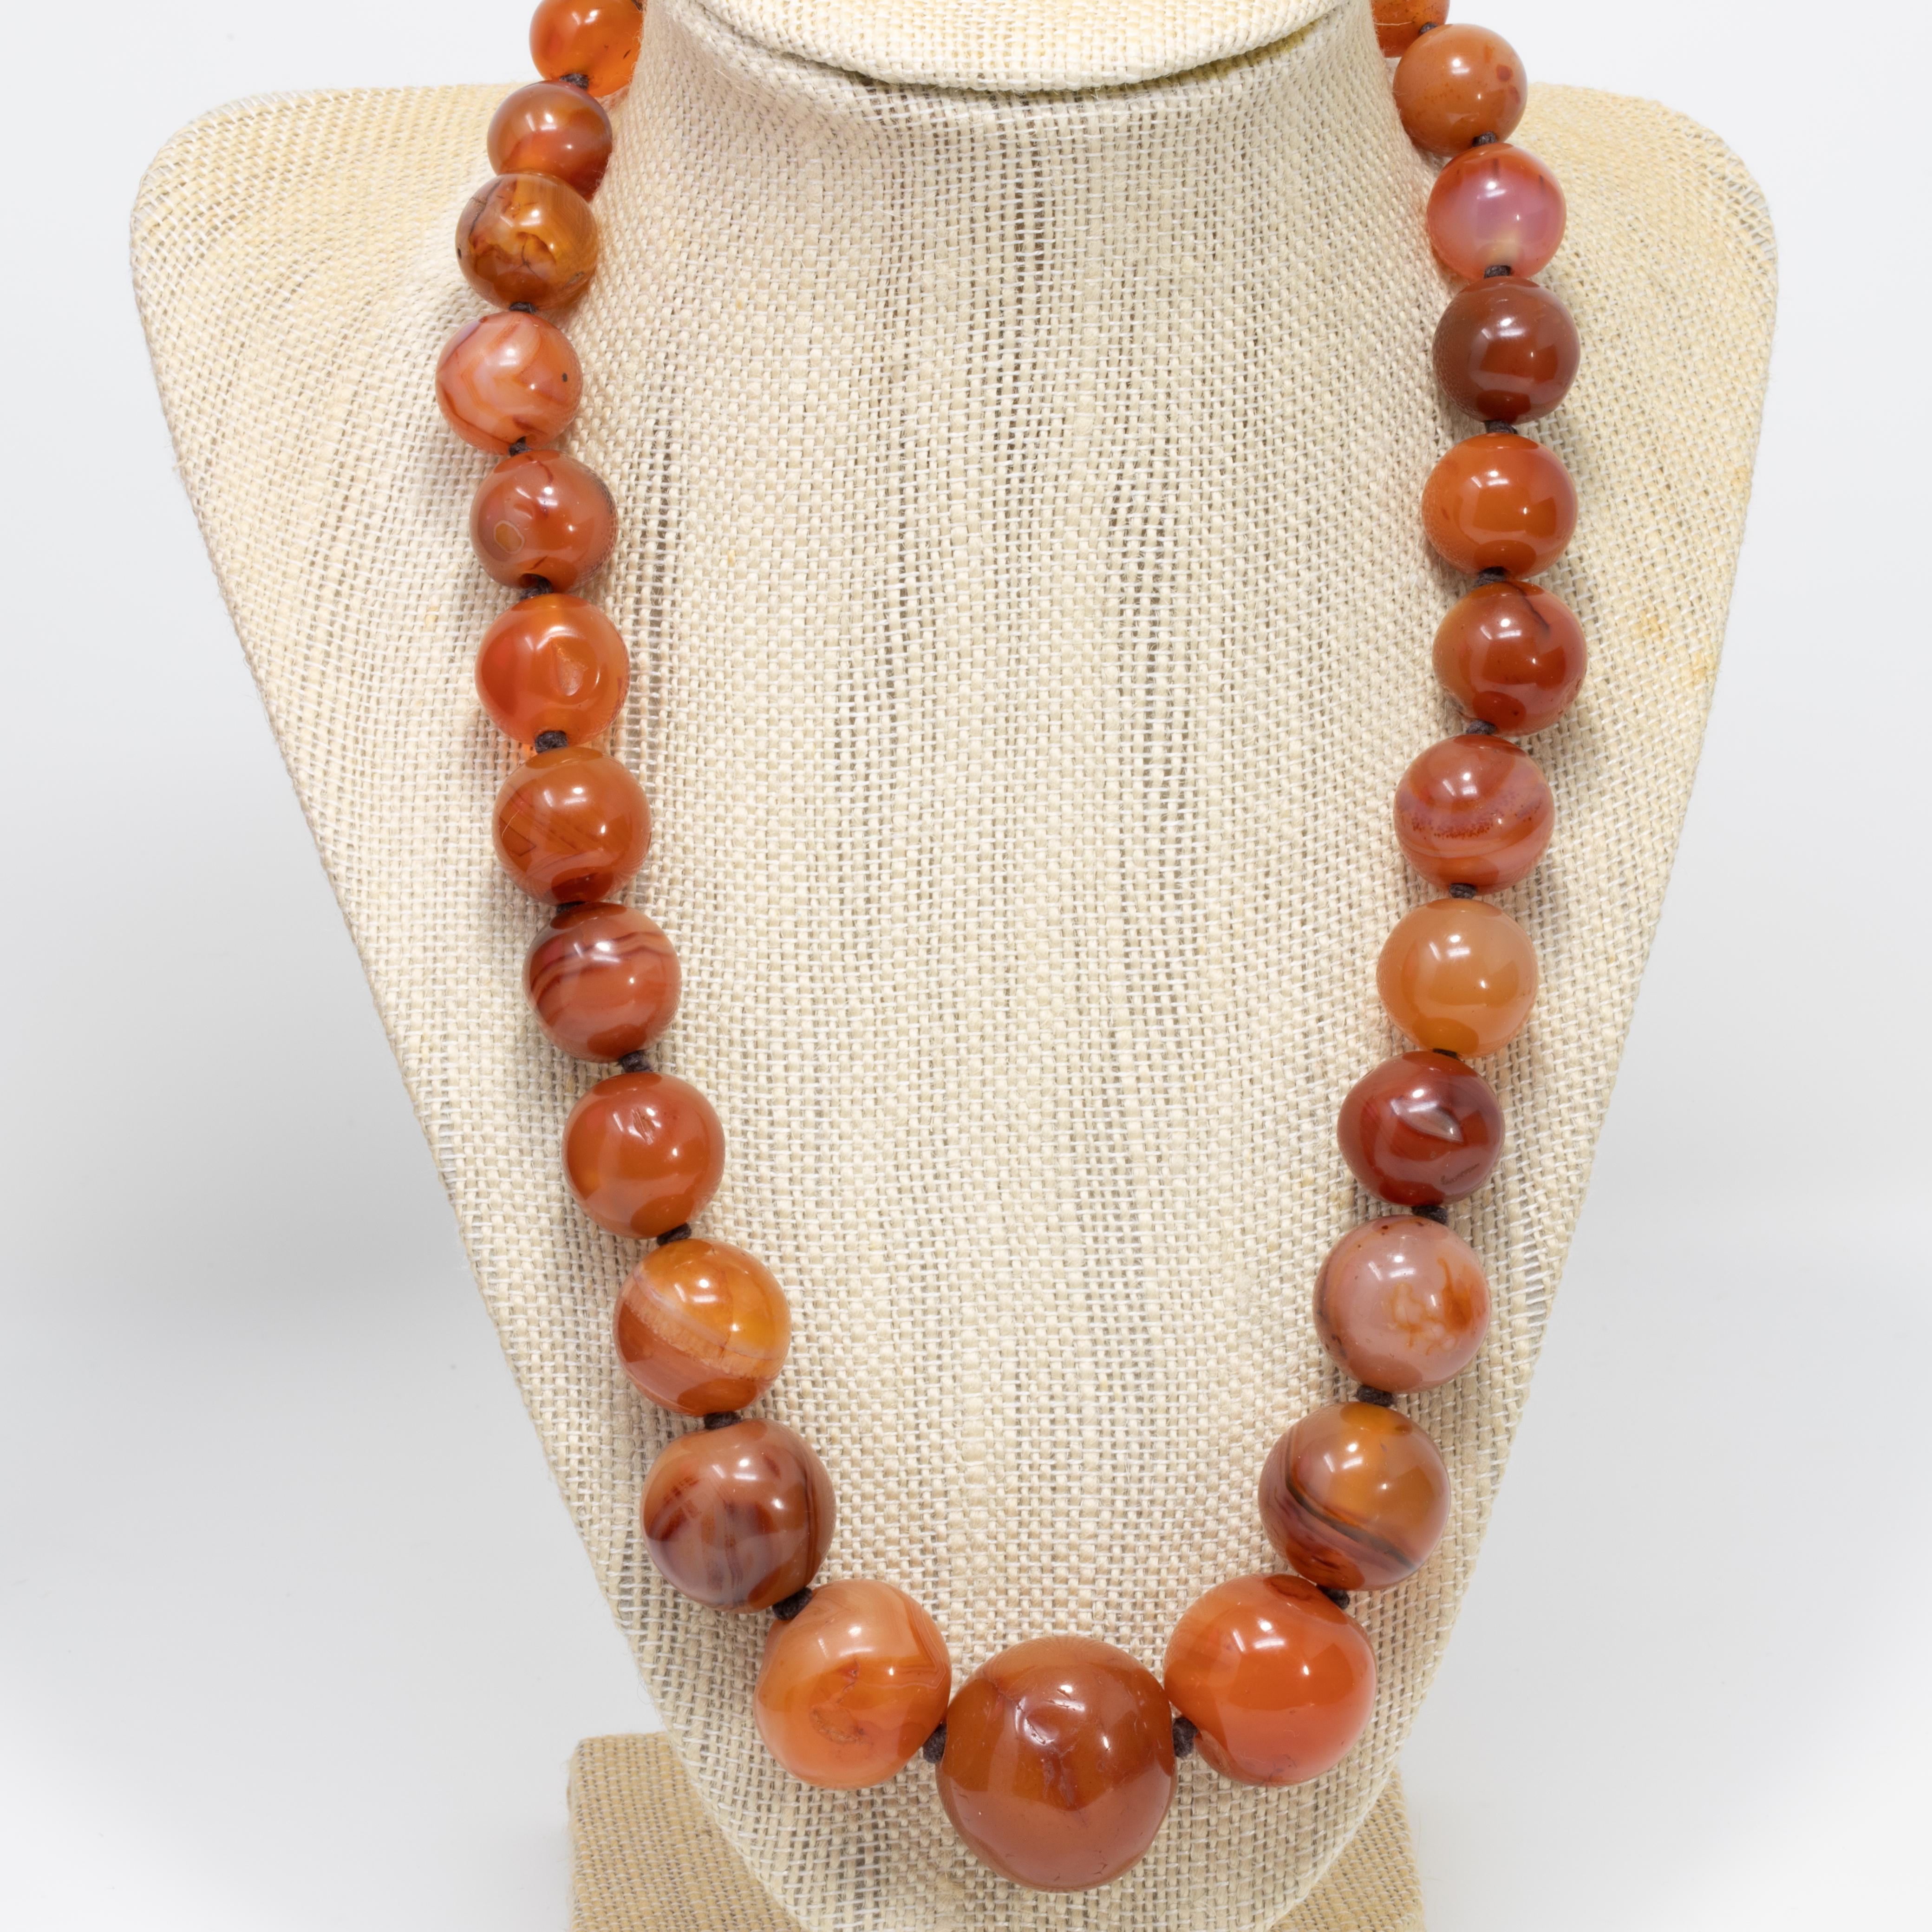 An extravagant carnelian graduated bead necklace on a dark brown knotted string. Features genuine carnelian beads ranging from 9.5mm to 25.5mm in diameter, fastened with a 16mm long 585 (14 karat) yellow gold clasp. A rich, dark orange, translucent